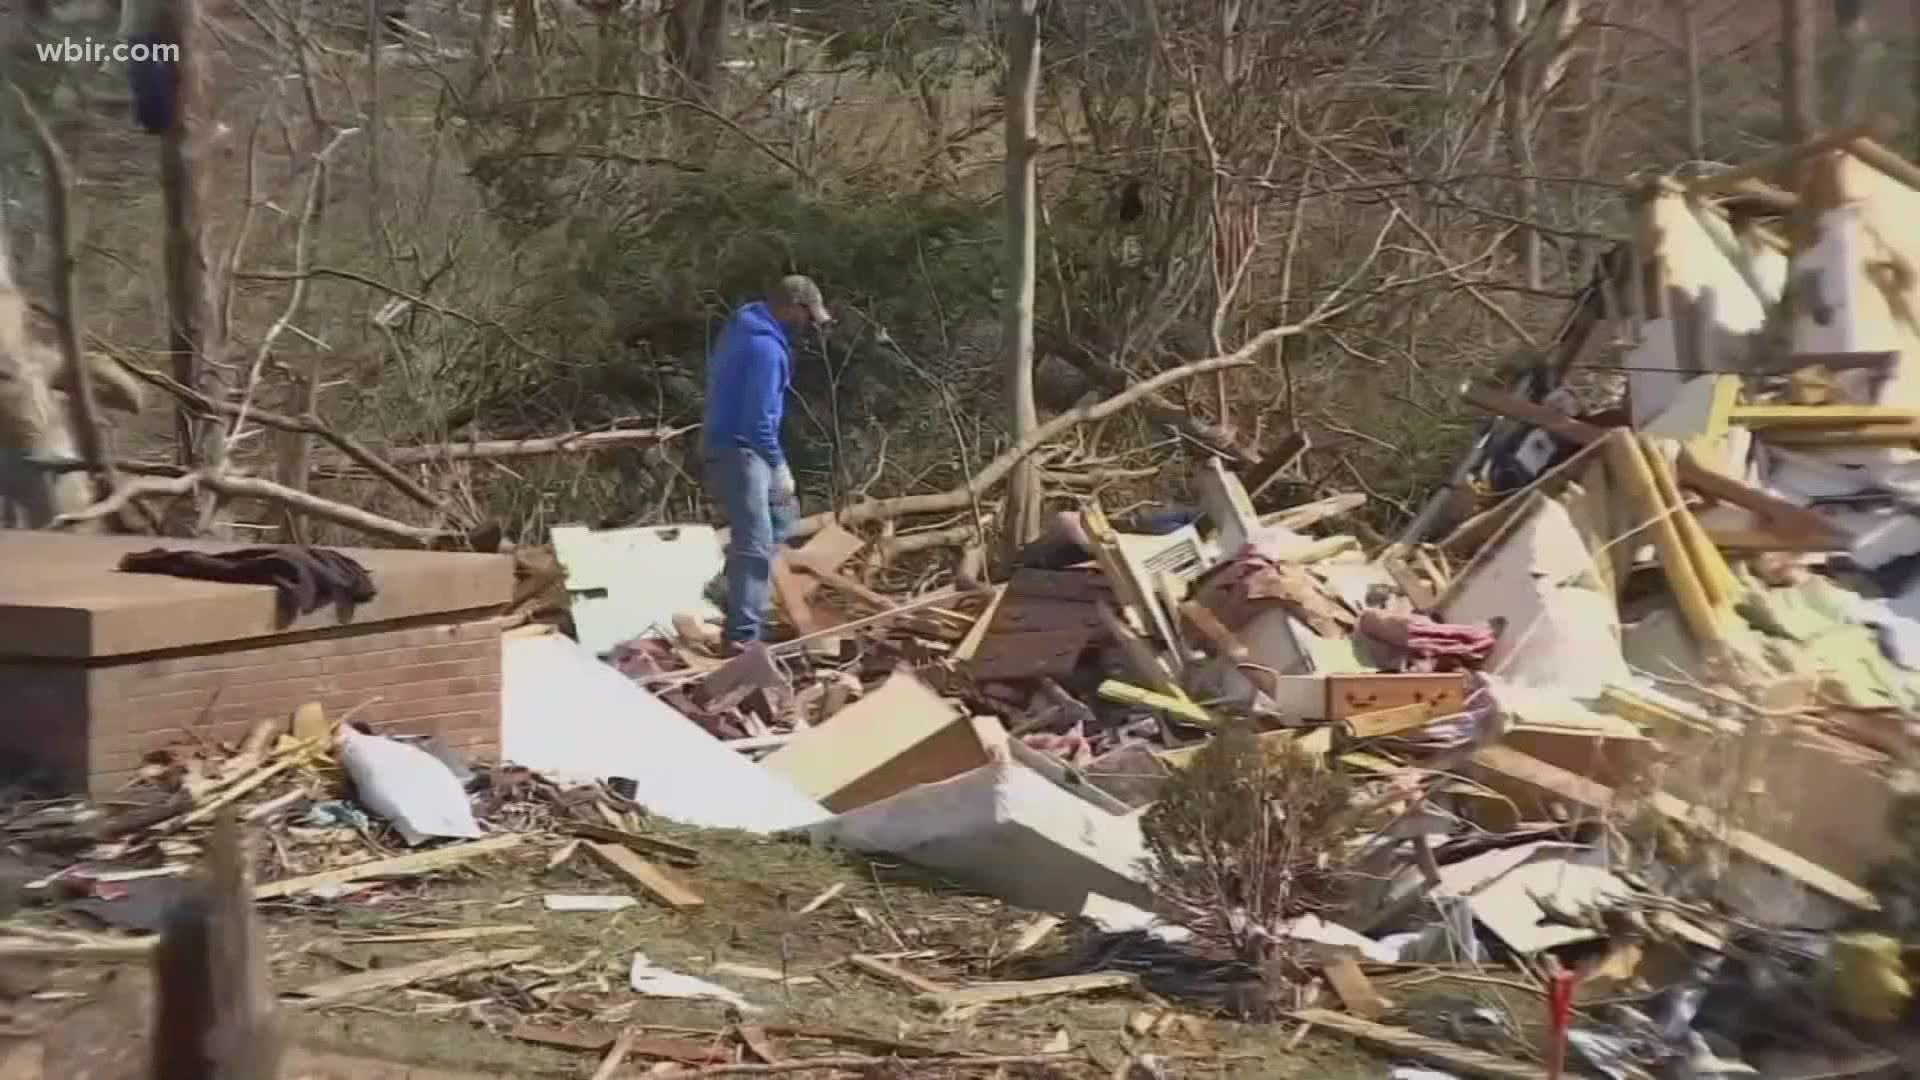 Today marks one year since tornadoes devastated parts of Middle Tennessee.